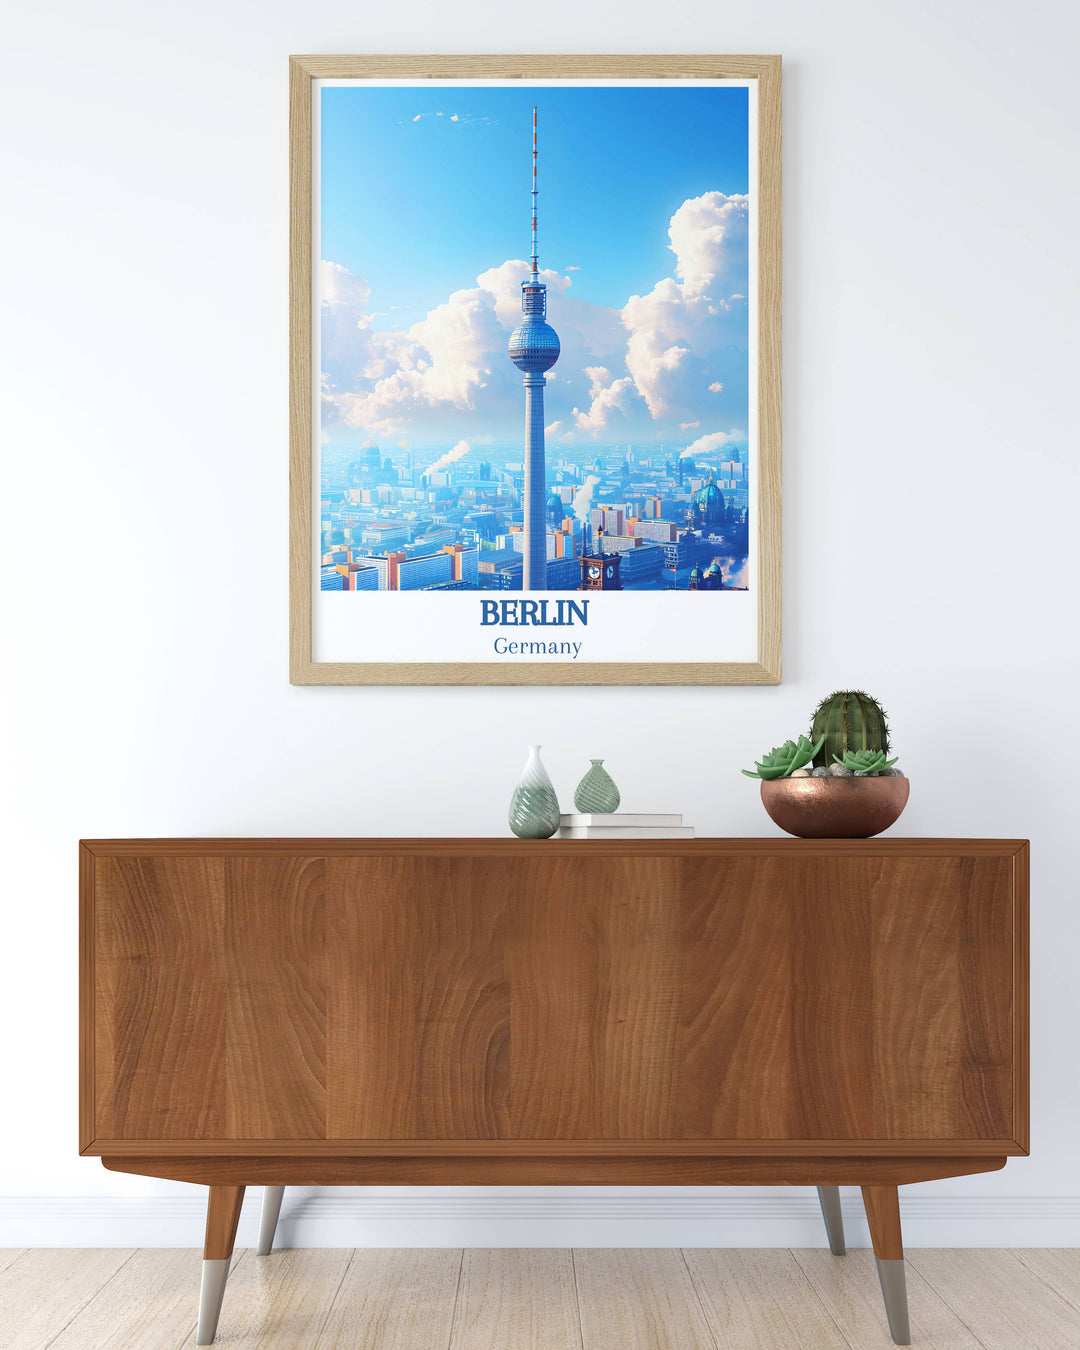 Striking Berlin Wall Decor featuring the Berliner Fernsehturm a blend of historical and contemporary art styles.